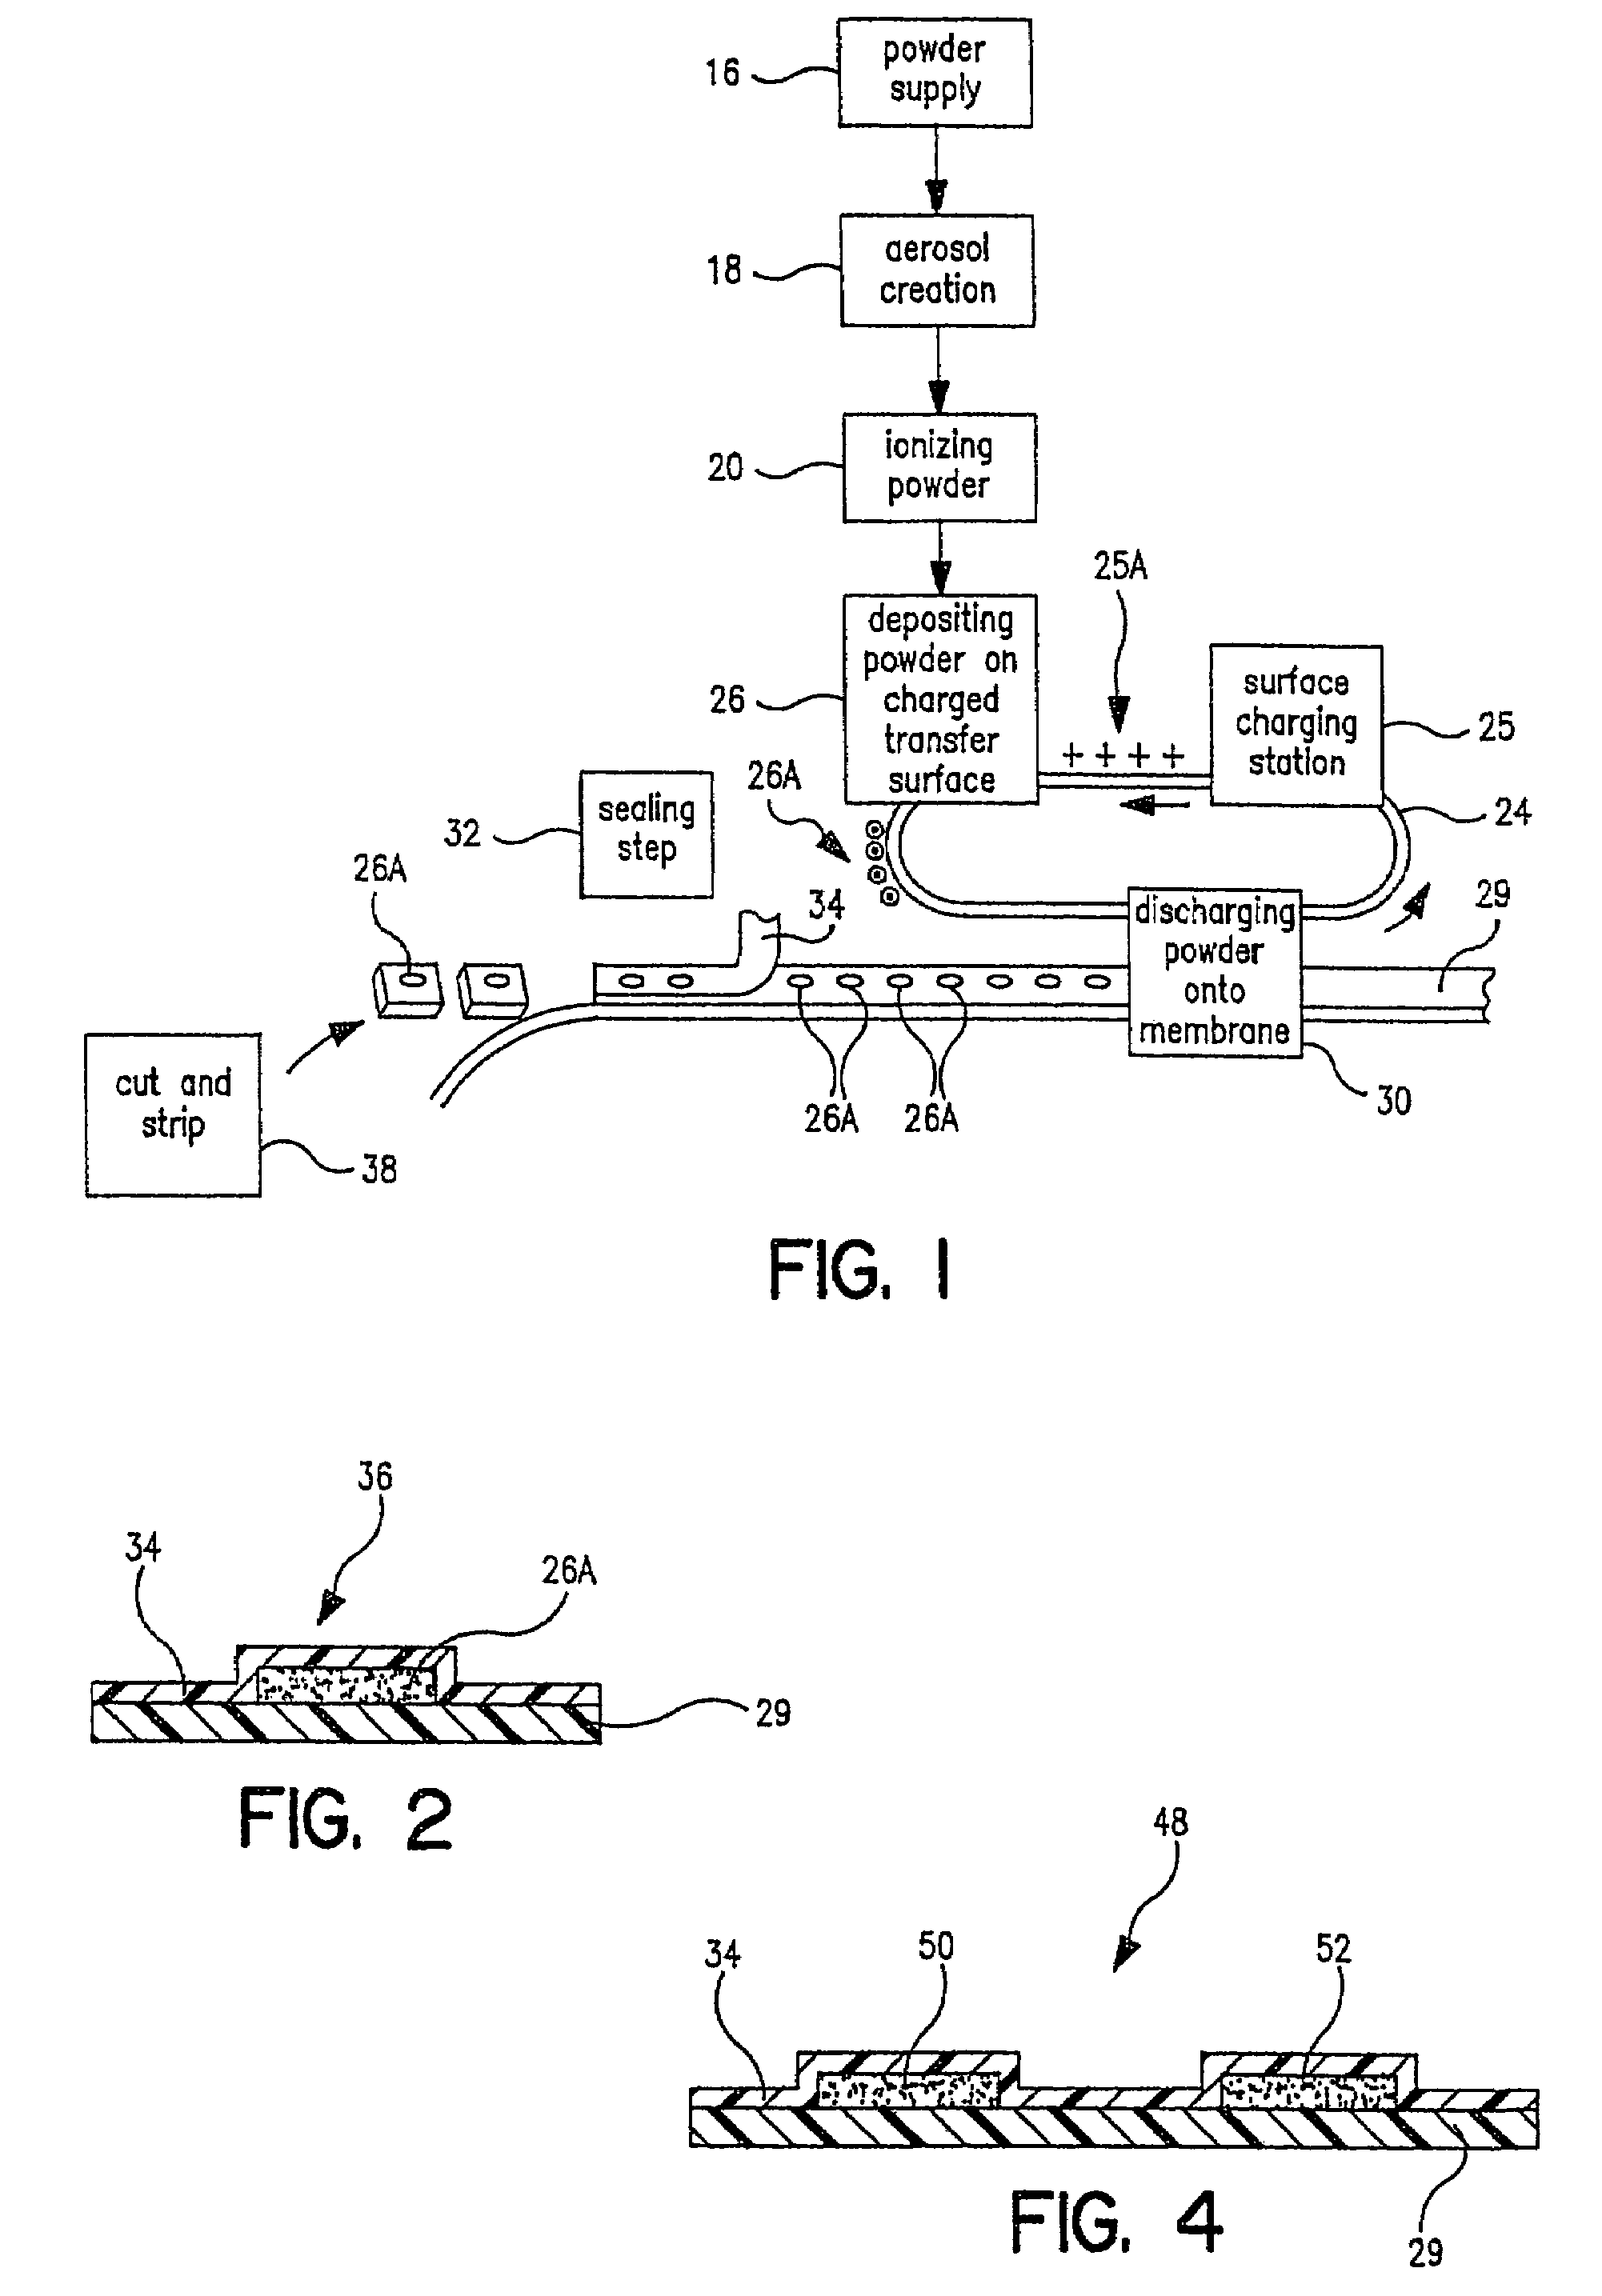 Metering and packaging of controlled release medication